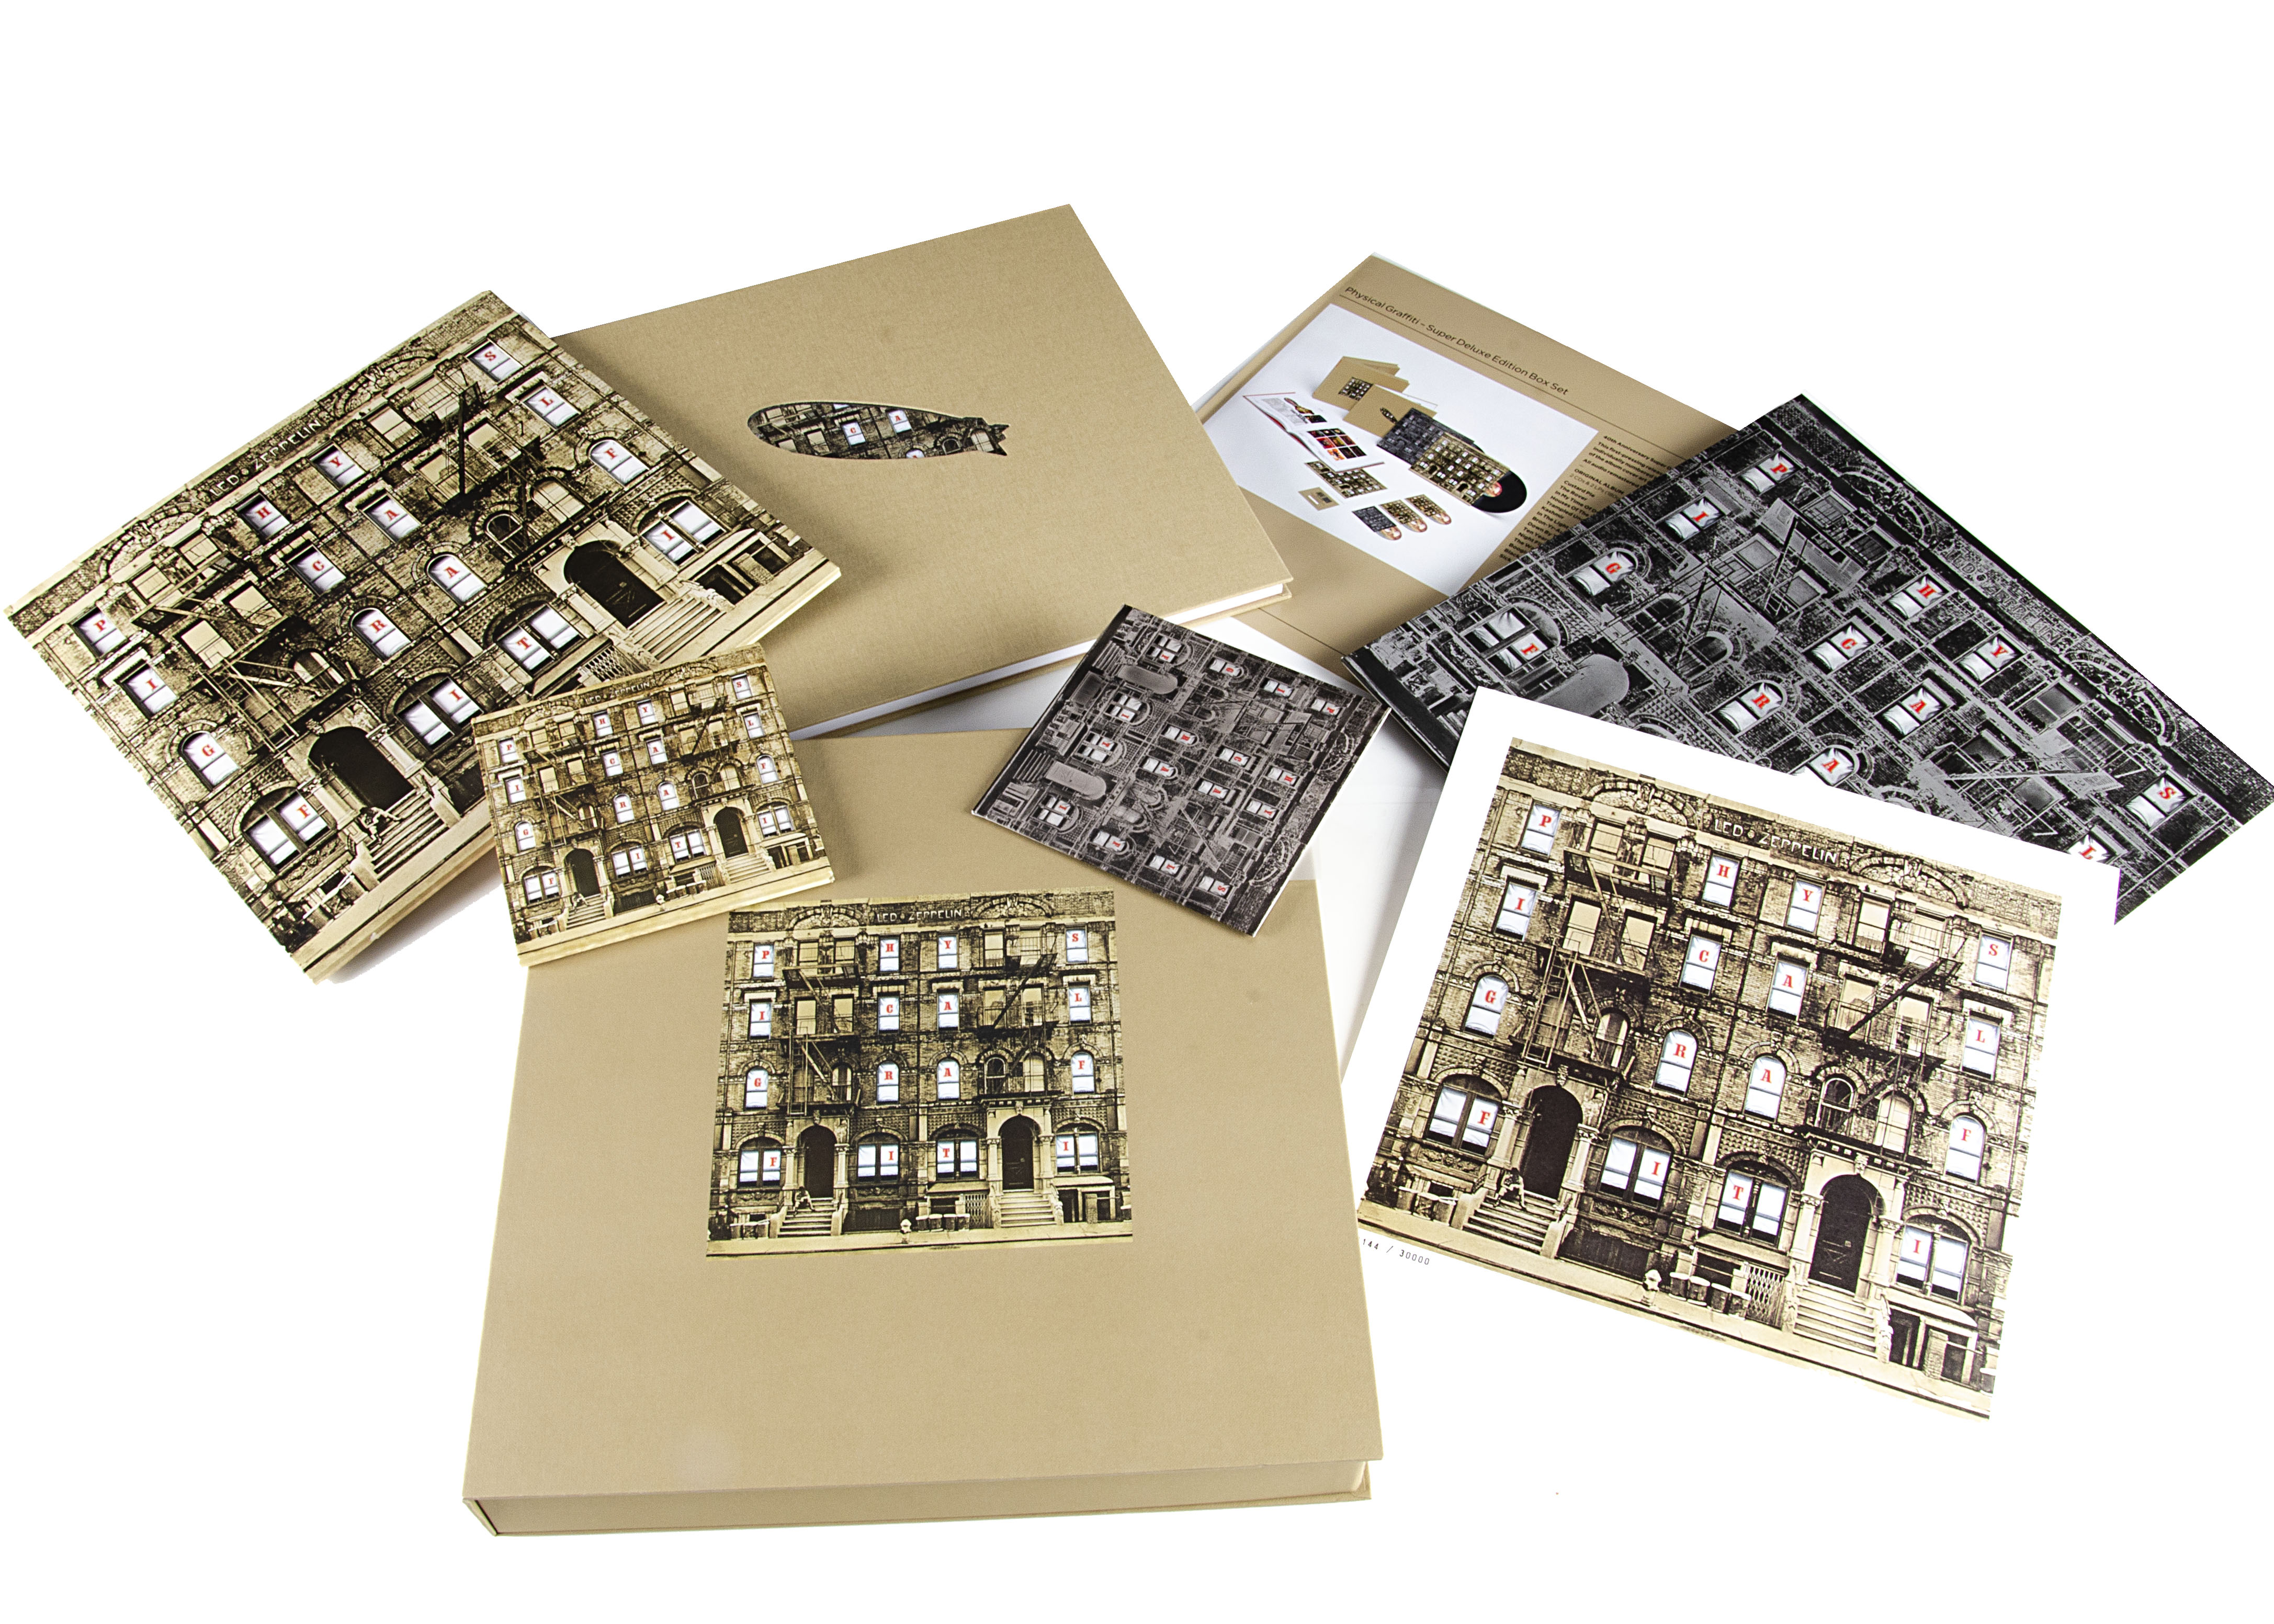 Led Zeppelin Box Set, Physical Graffiti - Super Deluxe 40th Anniversary Box Set released 2015 on - Image 2 of 2